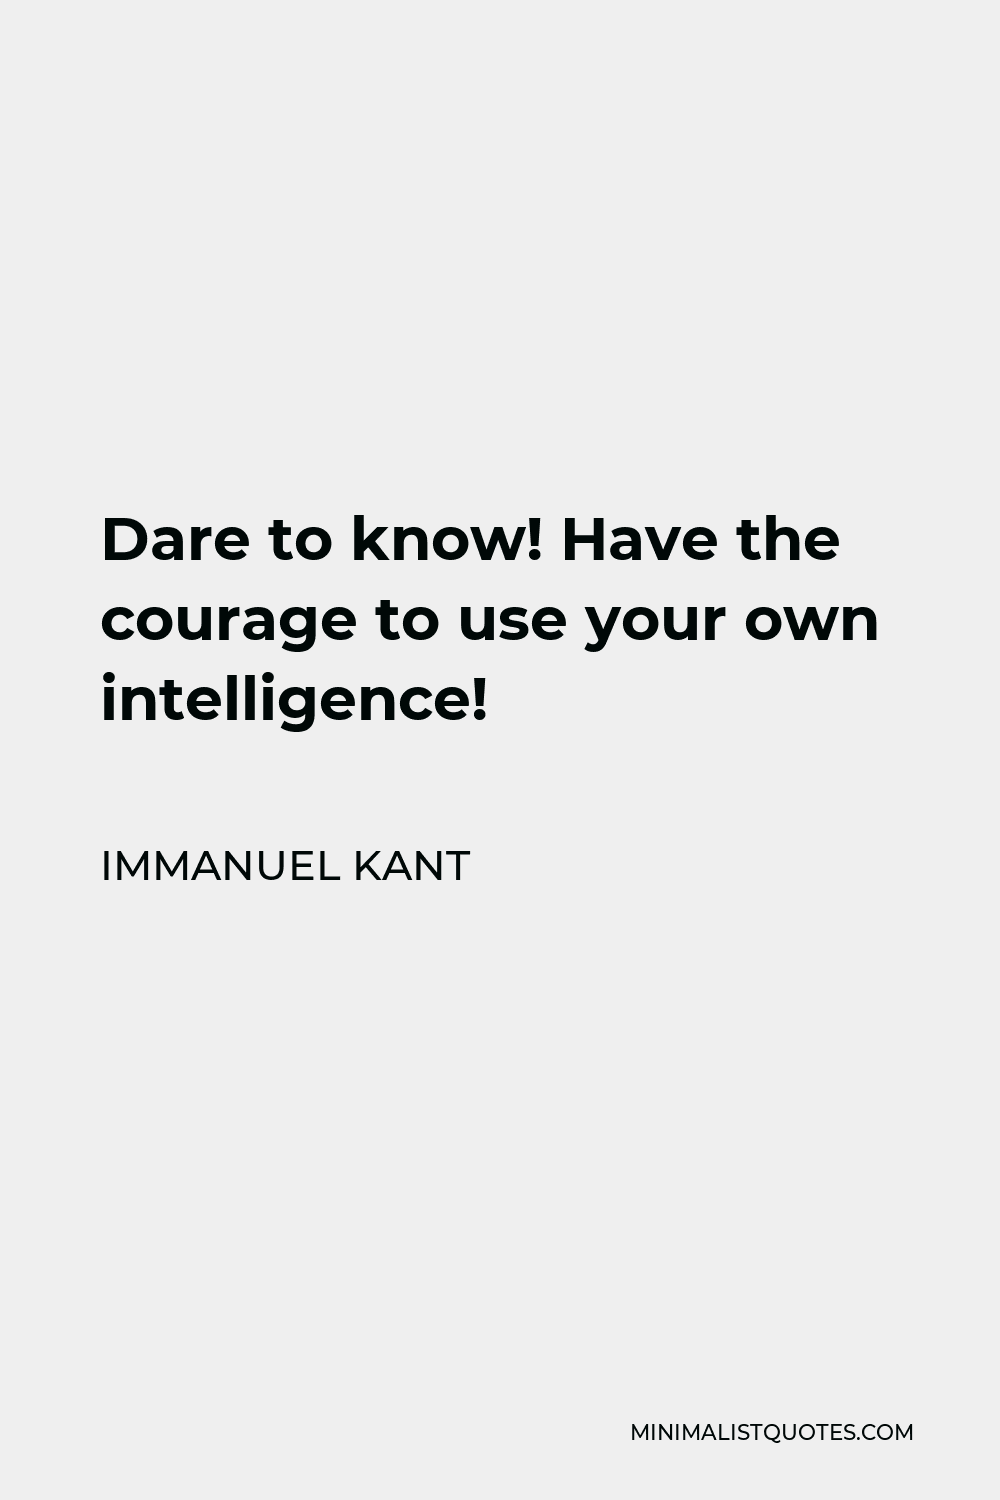 Immanuel Kant Quote Dare To Know Have The Courage To Use Your Own